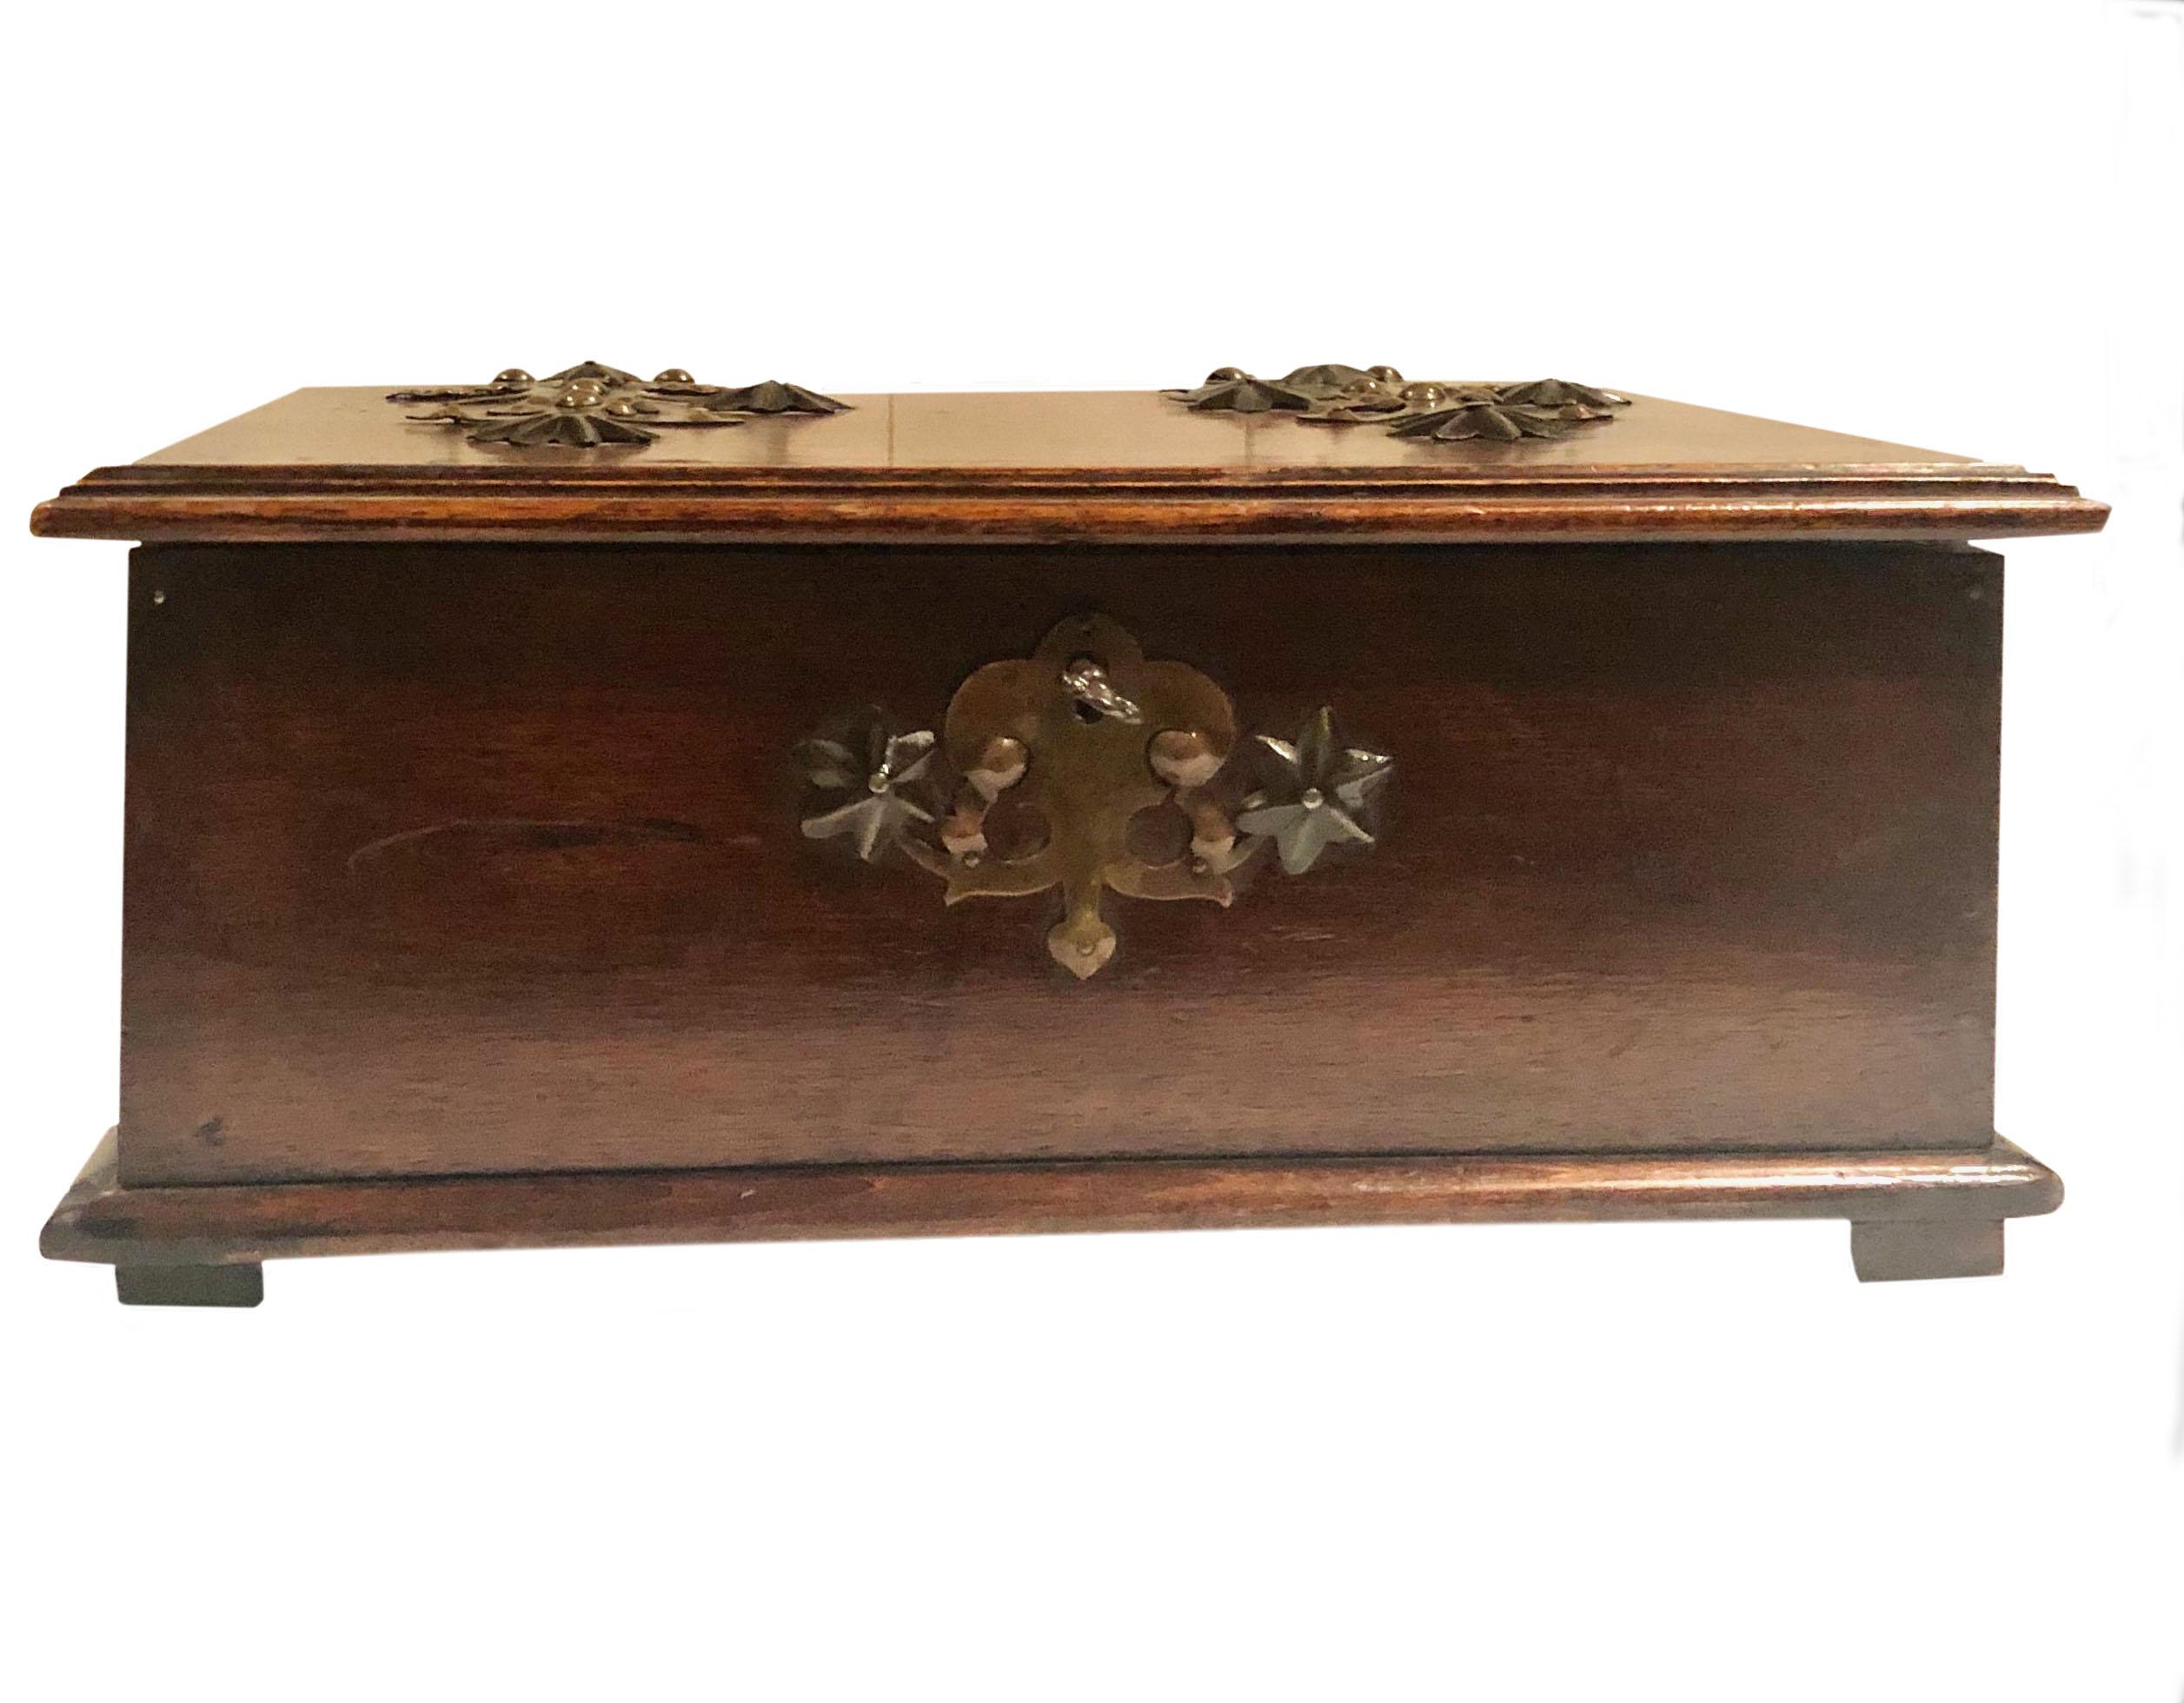 Early 20th Century Antique Turn of the Century German Walnut Box For Sale